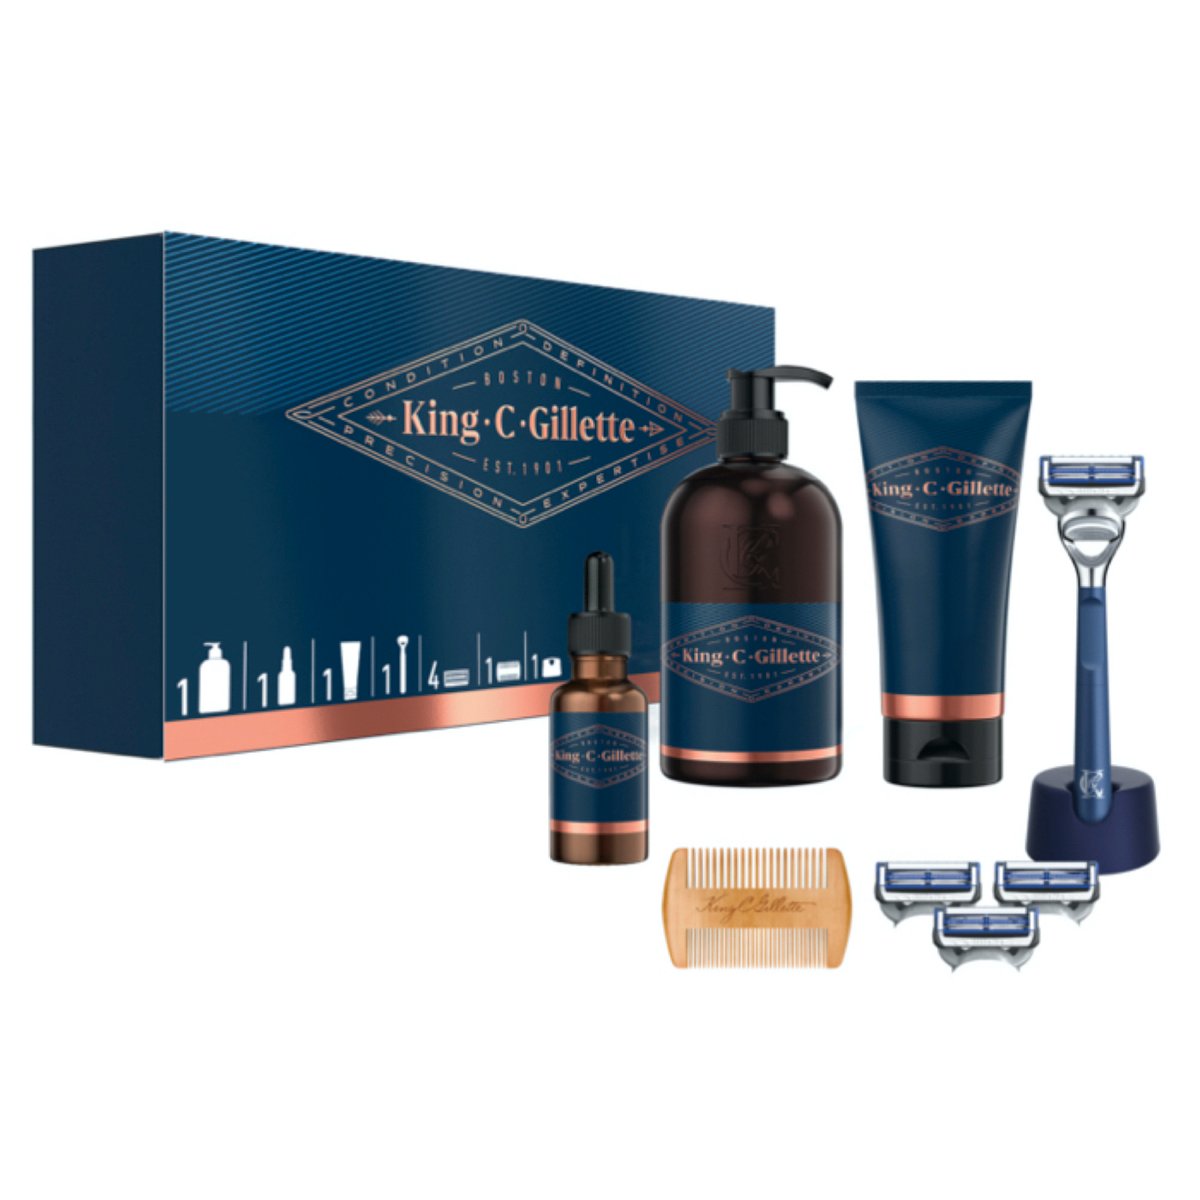 King C. Gillette Complete Beard Grooming Kit for Men, Beard & Face Wash + Beard Oil + Neck Razor + 3 Replacement Carts+ Comb + Razor Stand